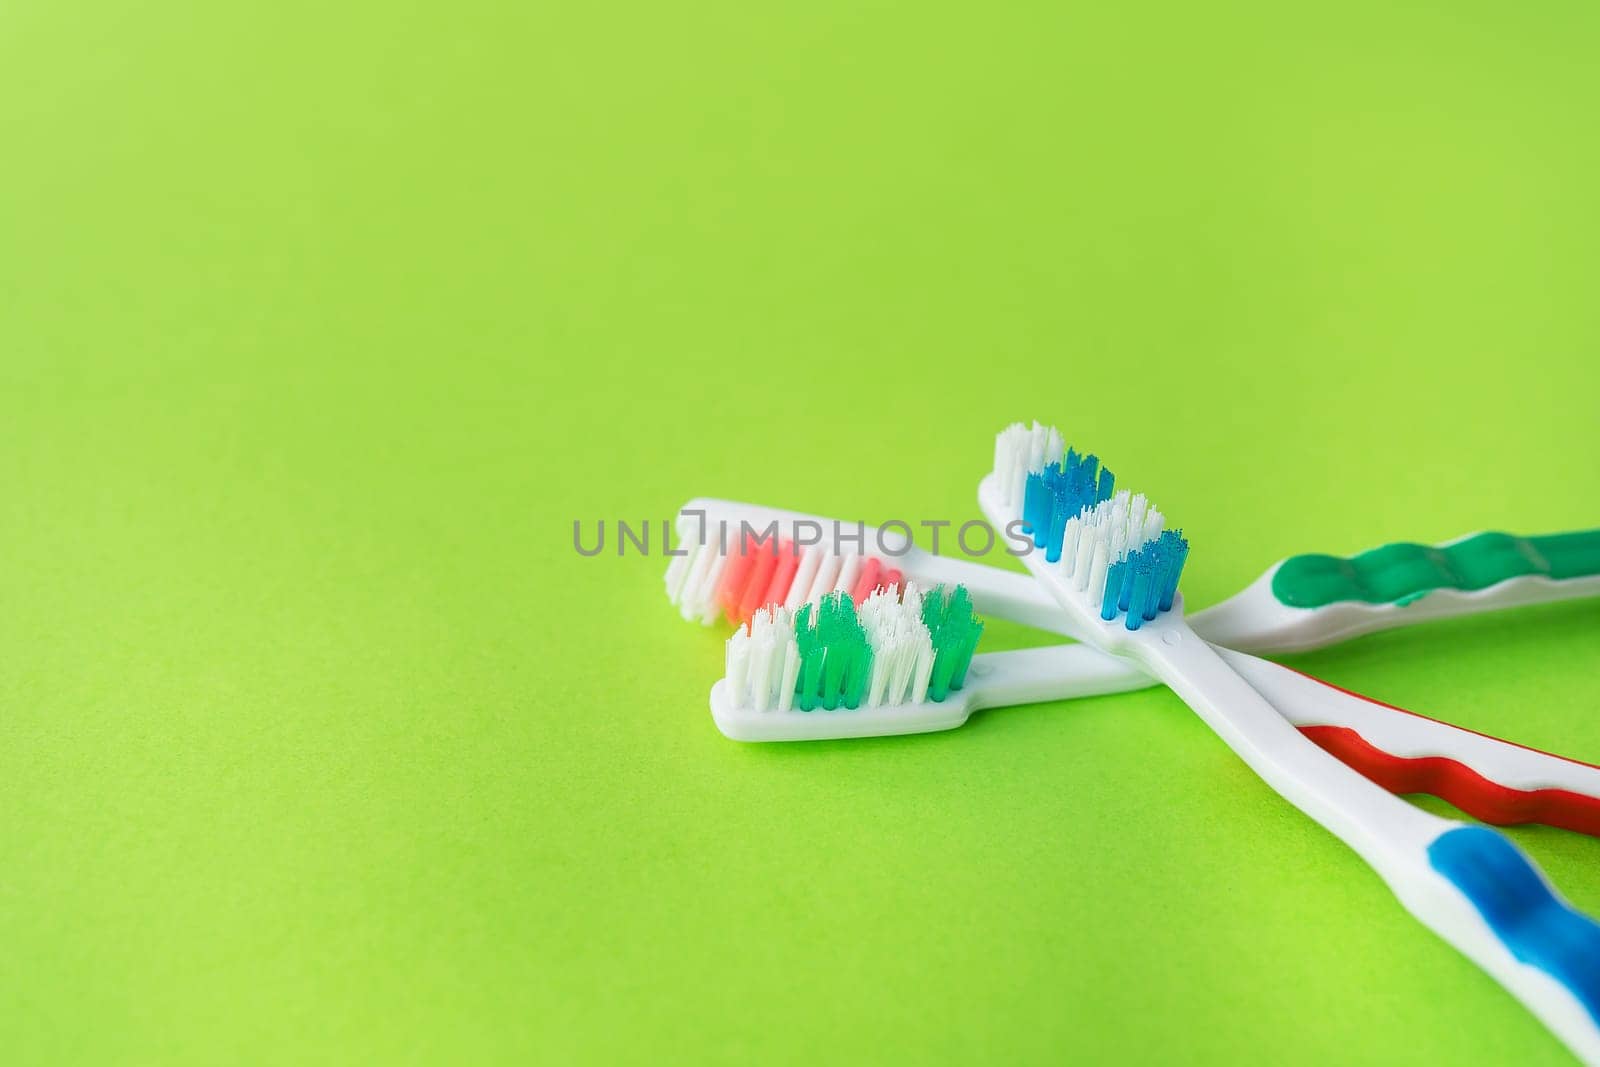 Multicolored toothbrushes on a green background, the concept of dental care and oral hygiene. Place for an inscription